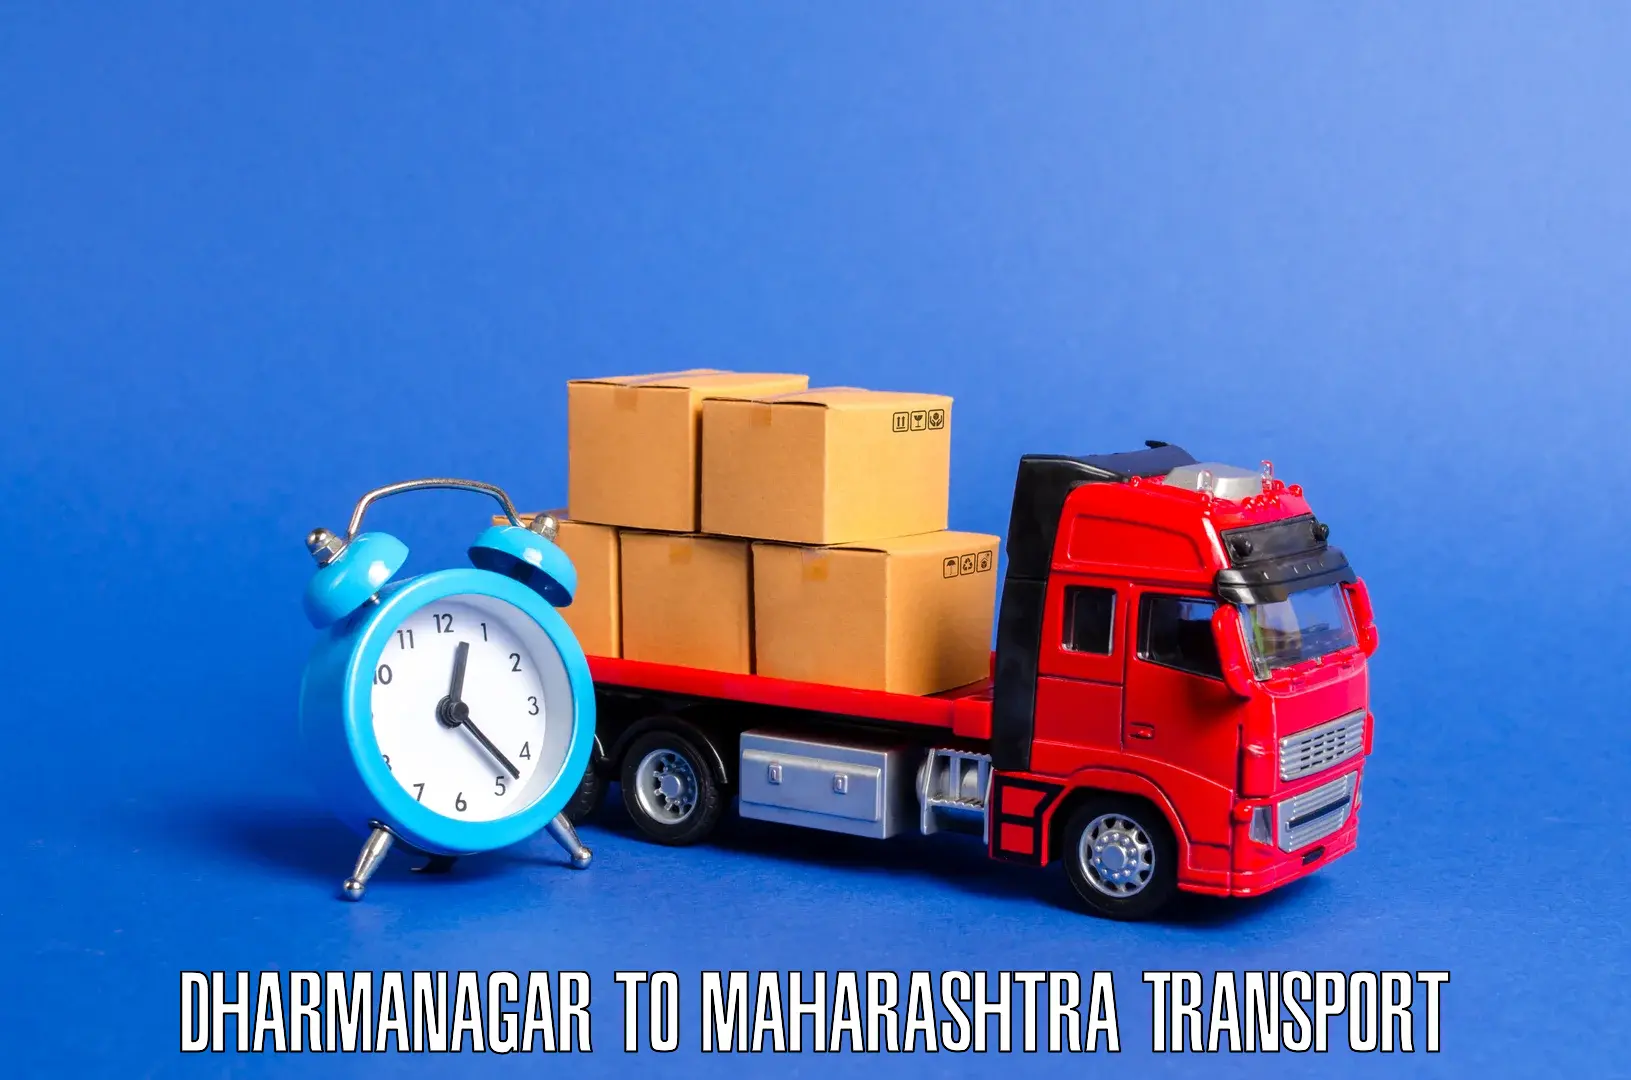 Container transportation services in Dharmanagar to Dadar